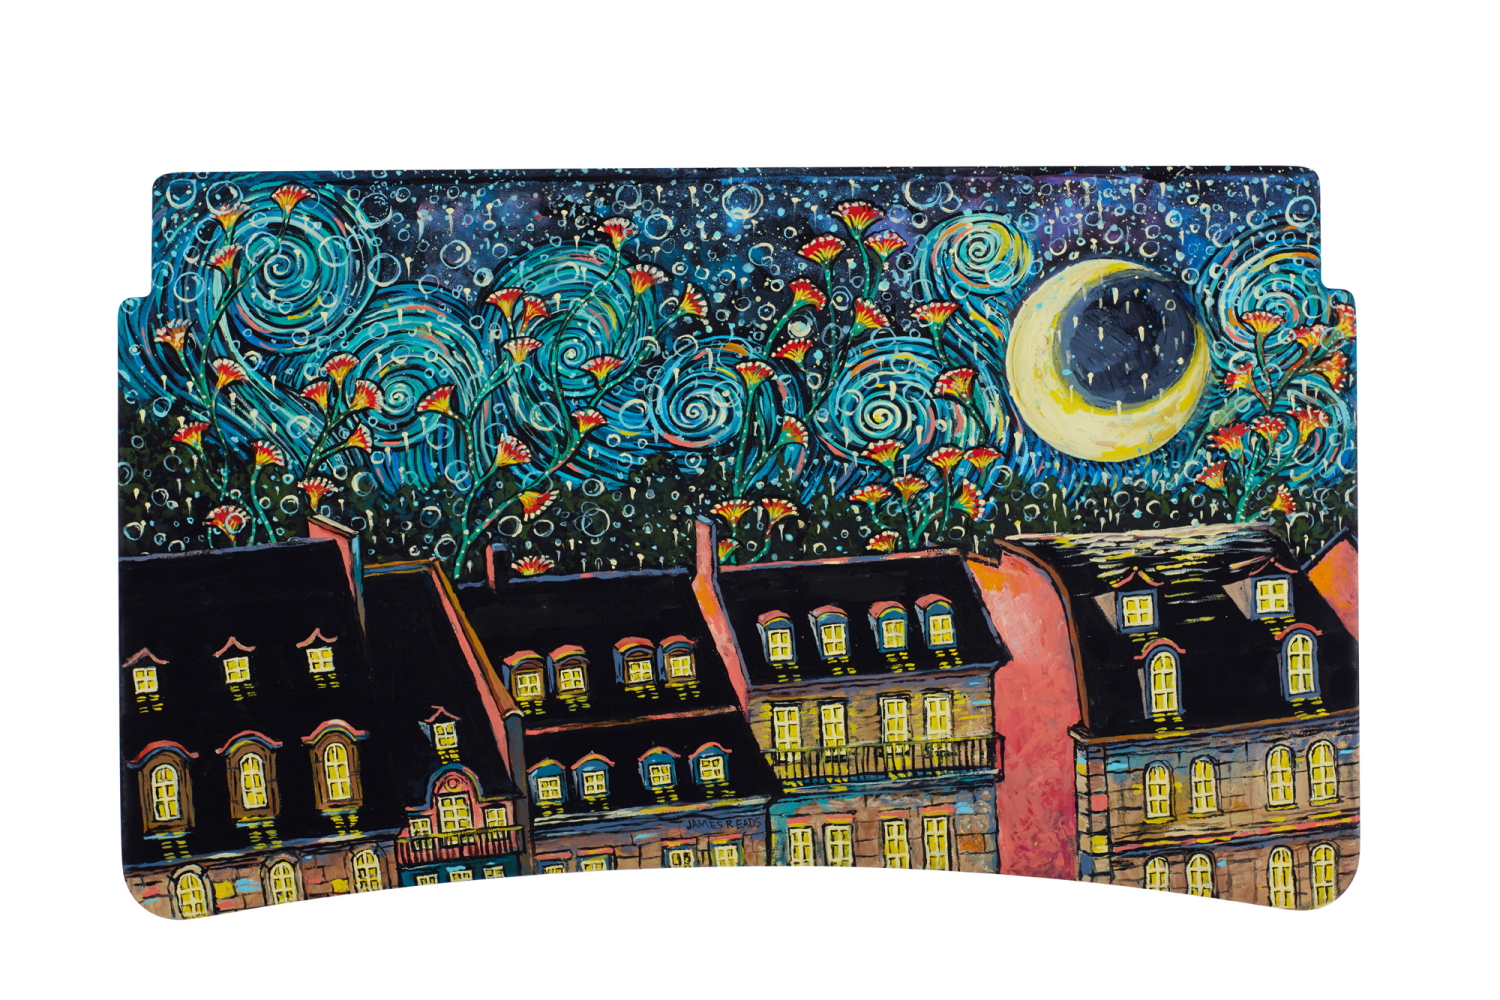 Artistic tray table for Delta Air Lines by James R. Eads (Paris). With its swirling, effervescent night sky, James’ portrait of Paris captures the magic of the city at night.